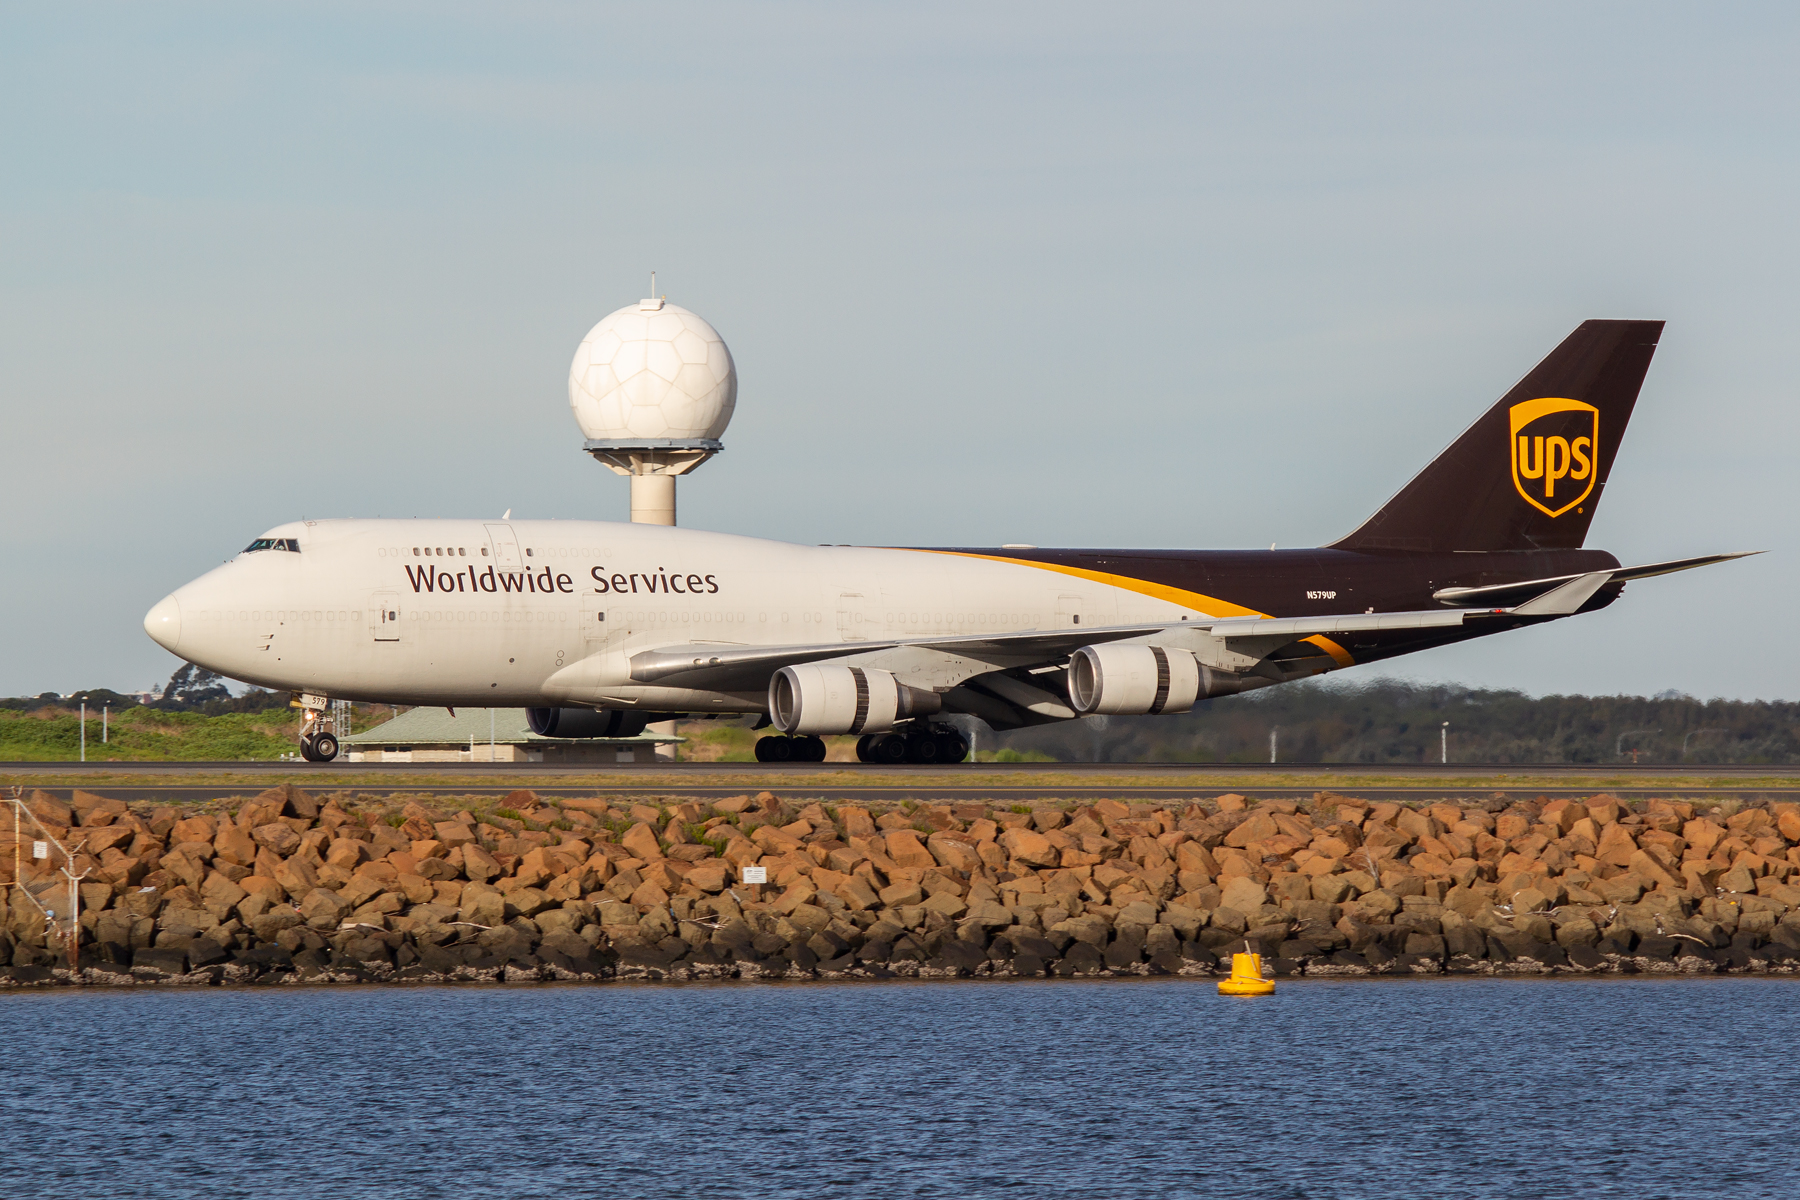 UPS Boeing 747-400 N579UP at Kingsford Smith